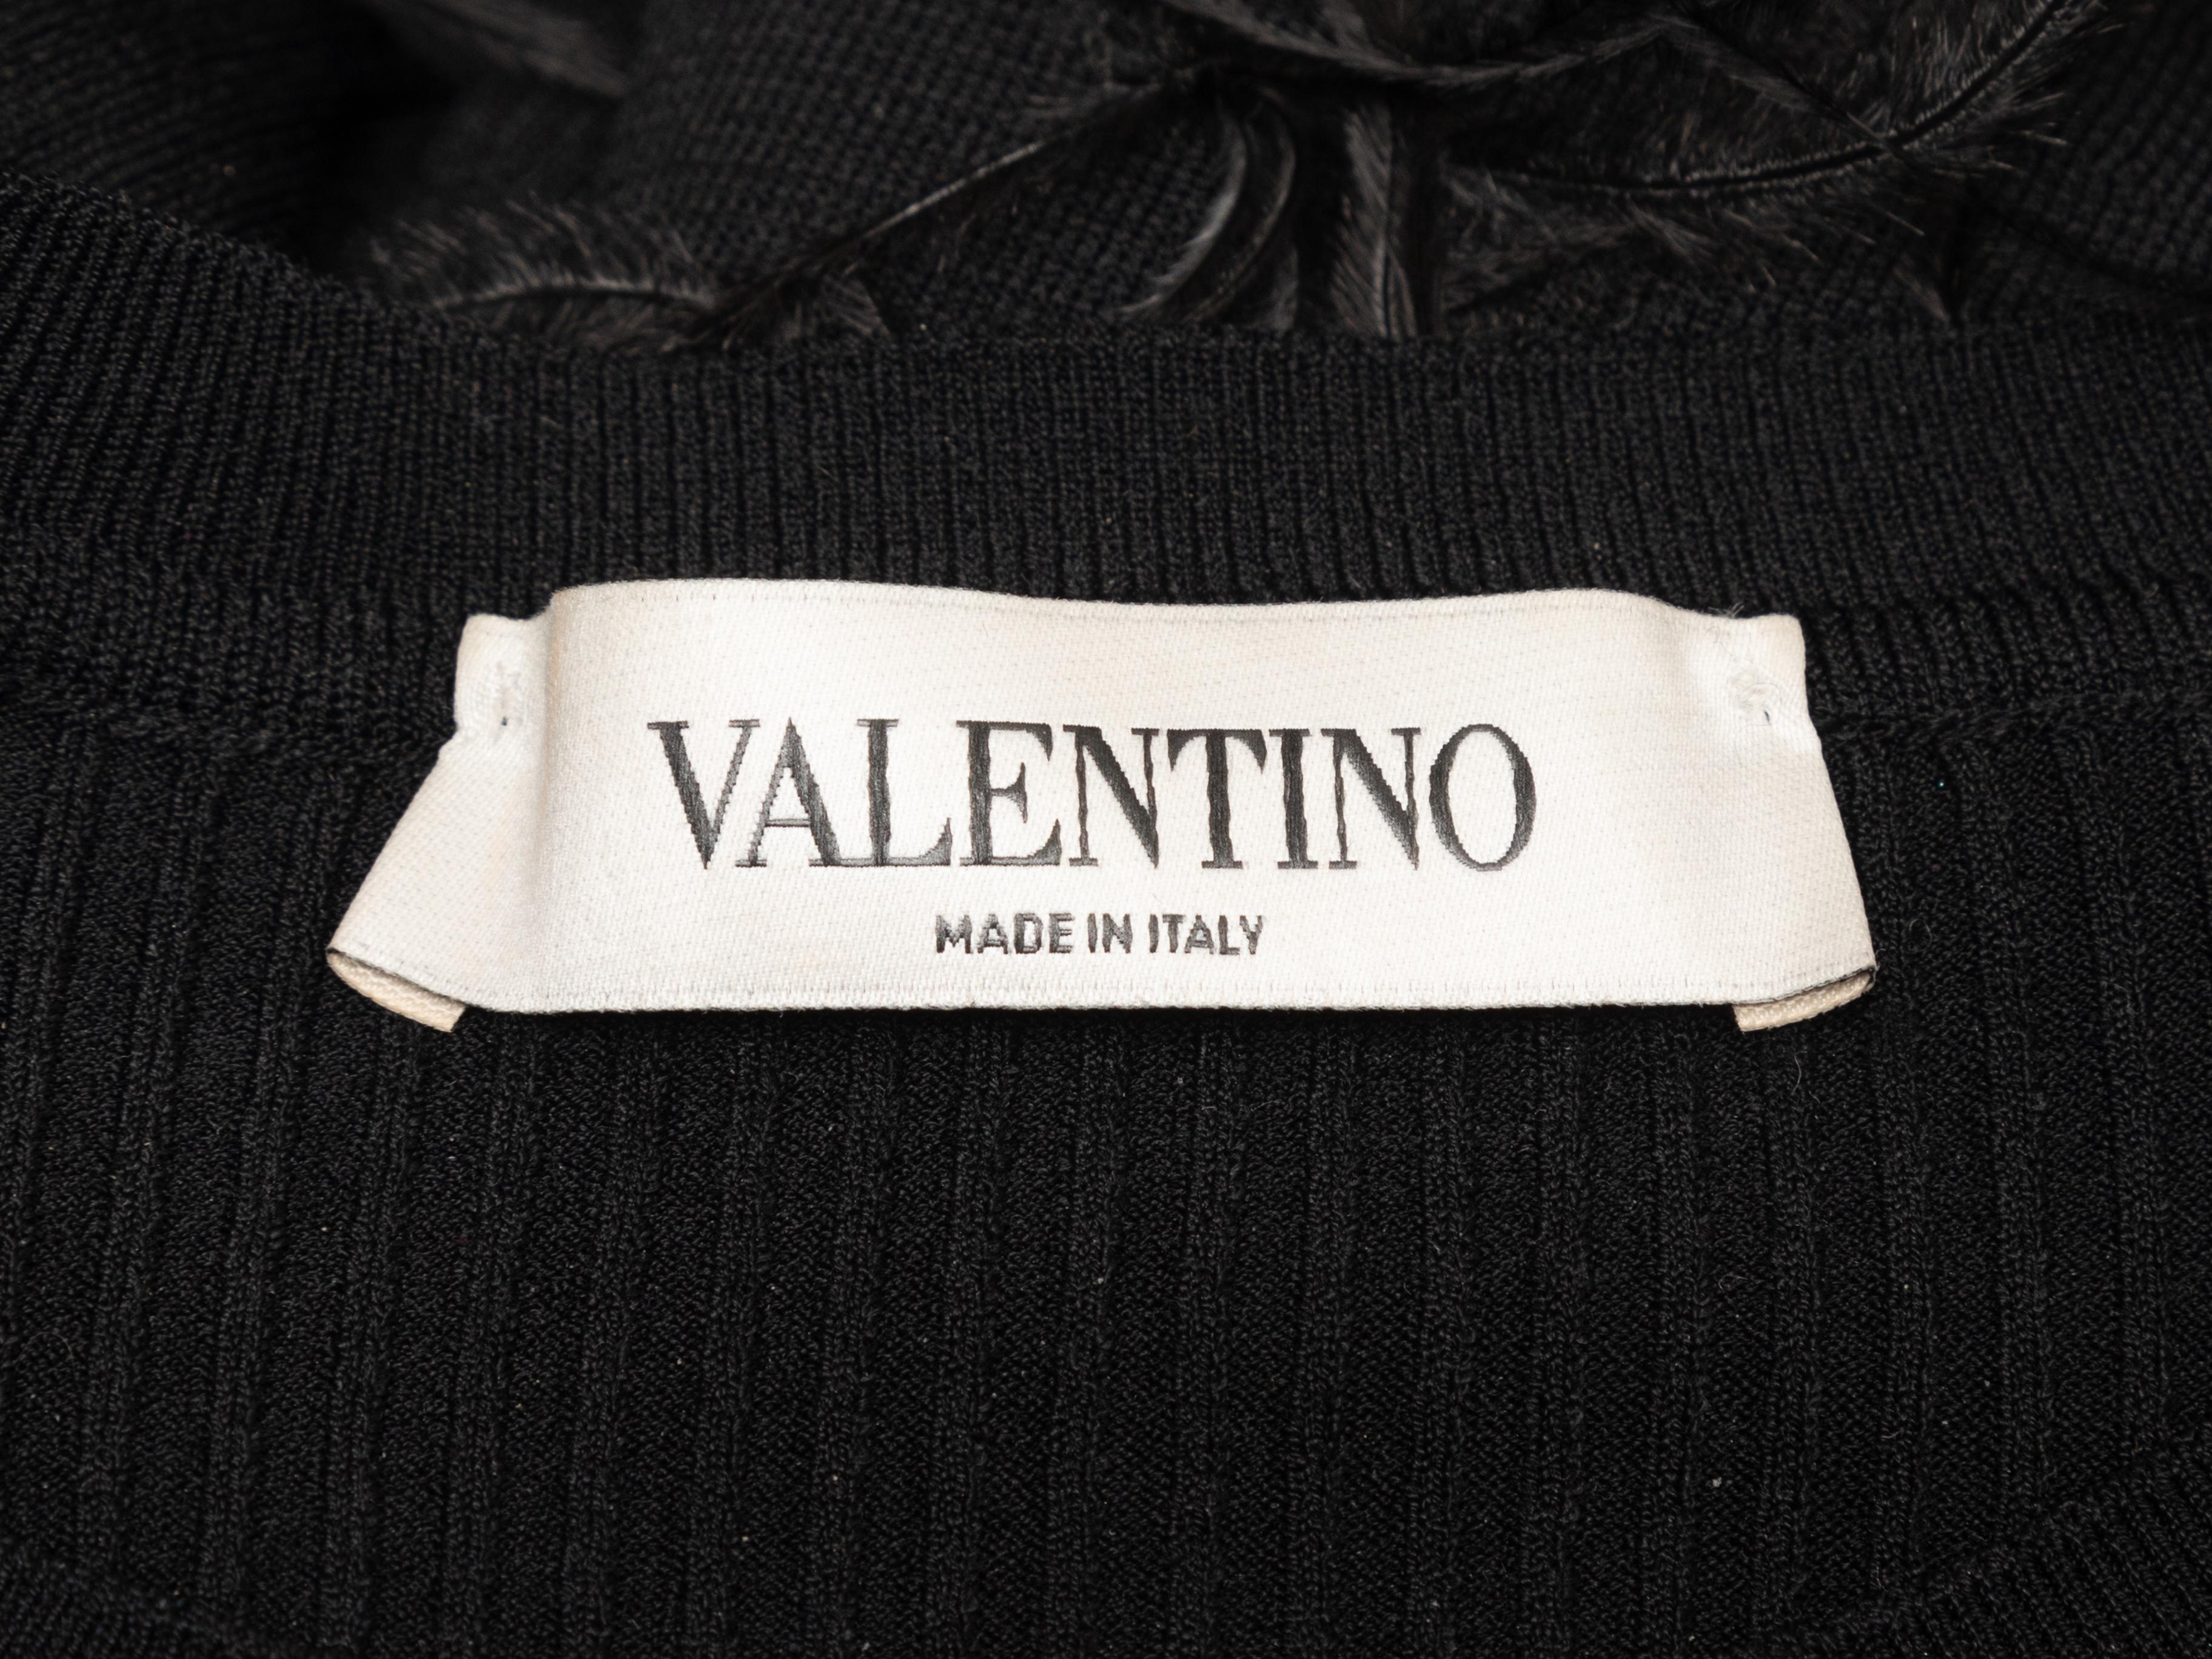 Women's or Men's Valentino Black Rib Knit Feather-Trimmed Top